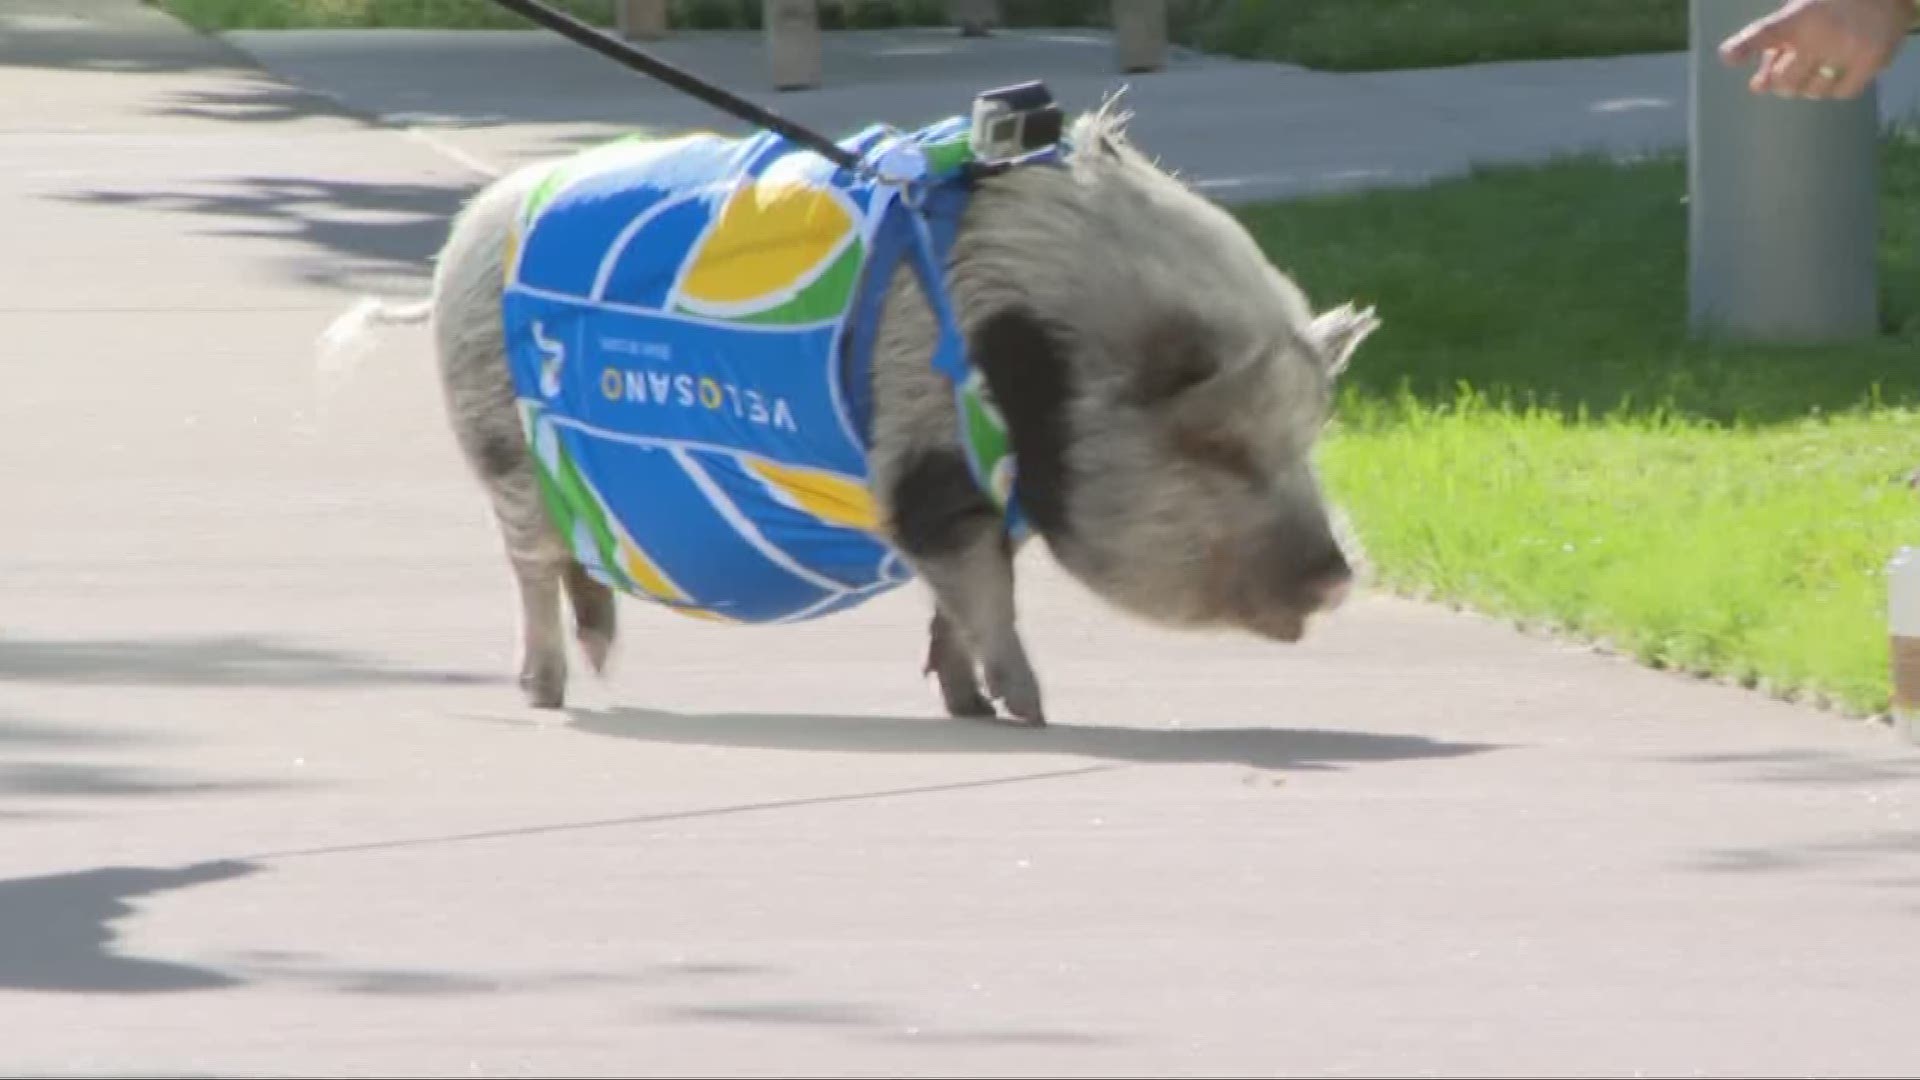 June 25, 2018: Meet Zumi the pig. Zumi has been raising money for all the VeloSano bicycling events held in Cleveland with the help from her doctor mom Krista Dobbie.